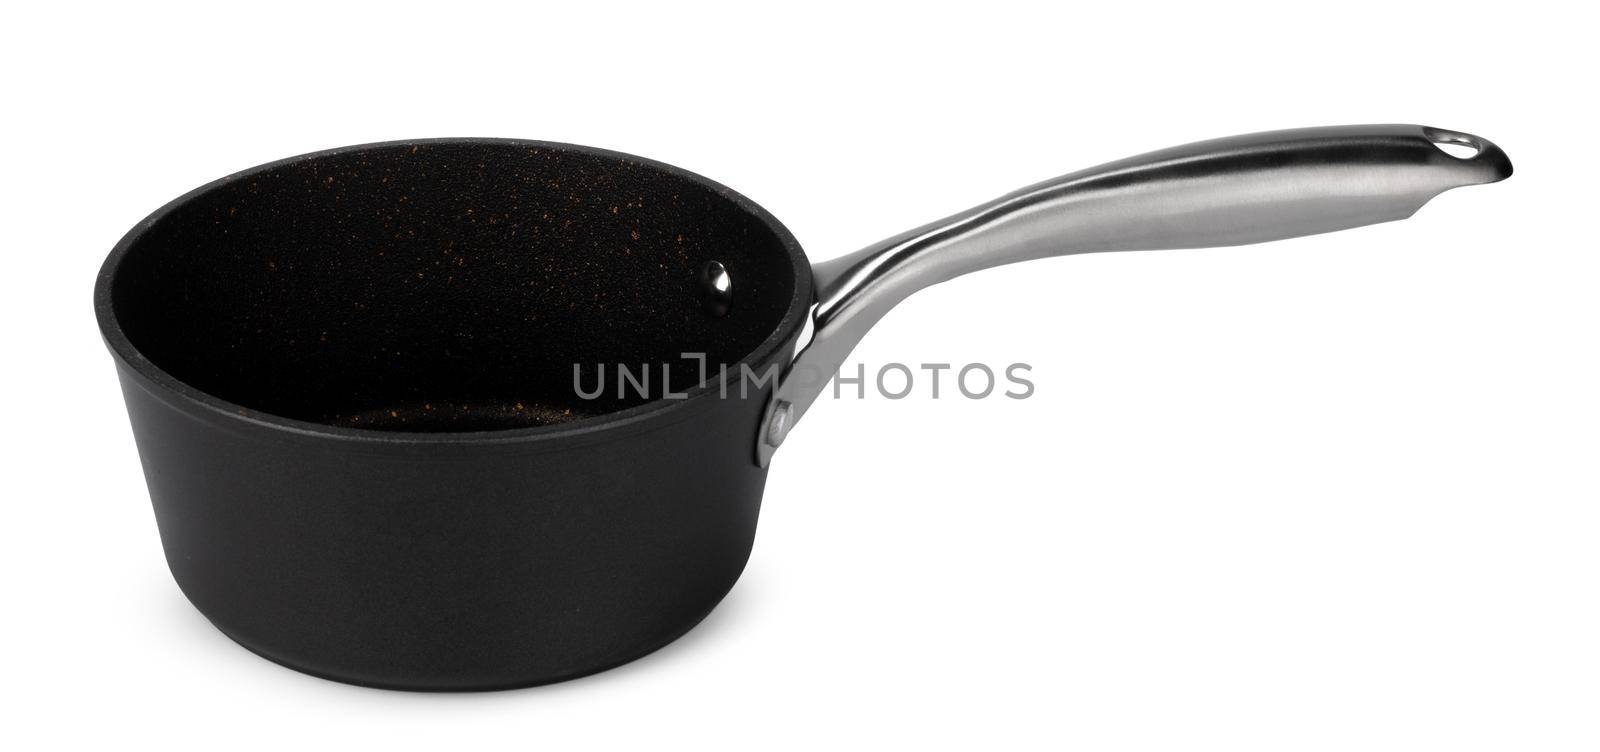 New black stew pan isolated on white by Fabrikasimf